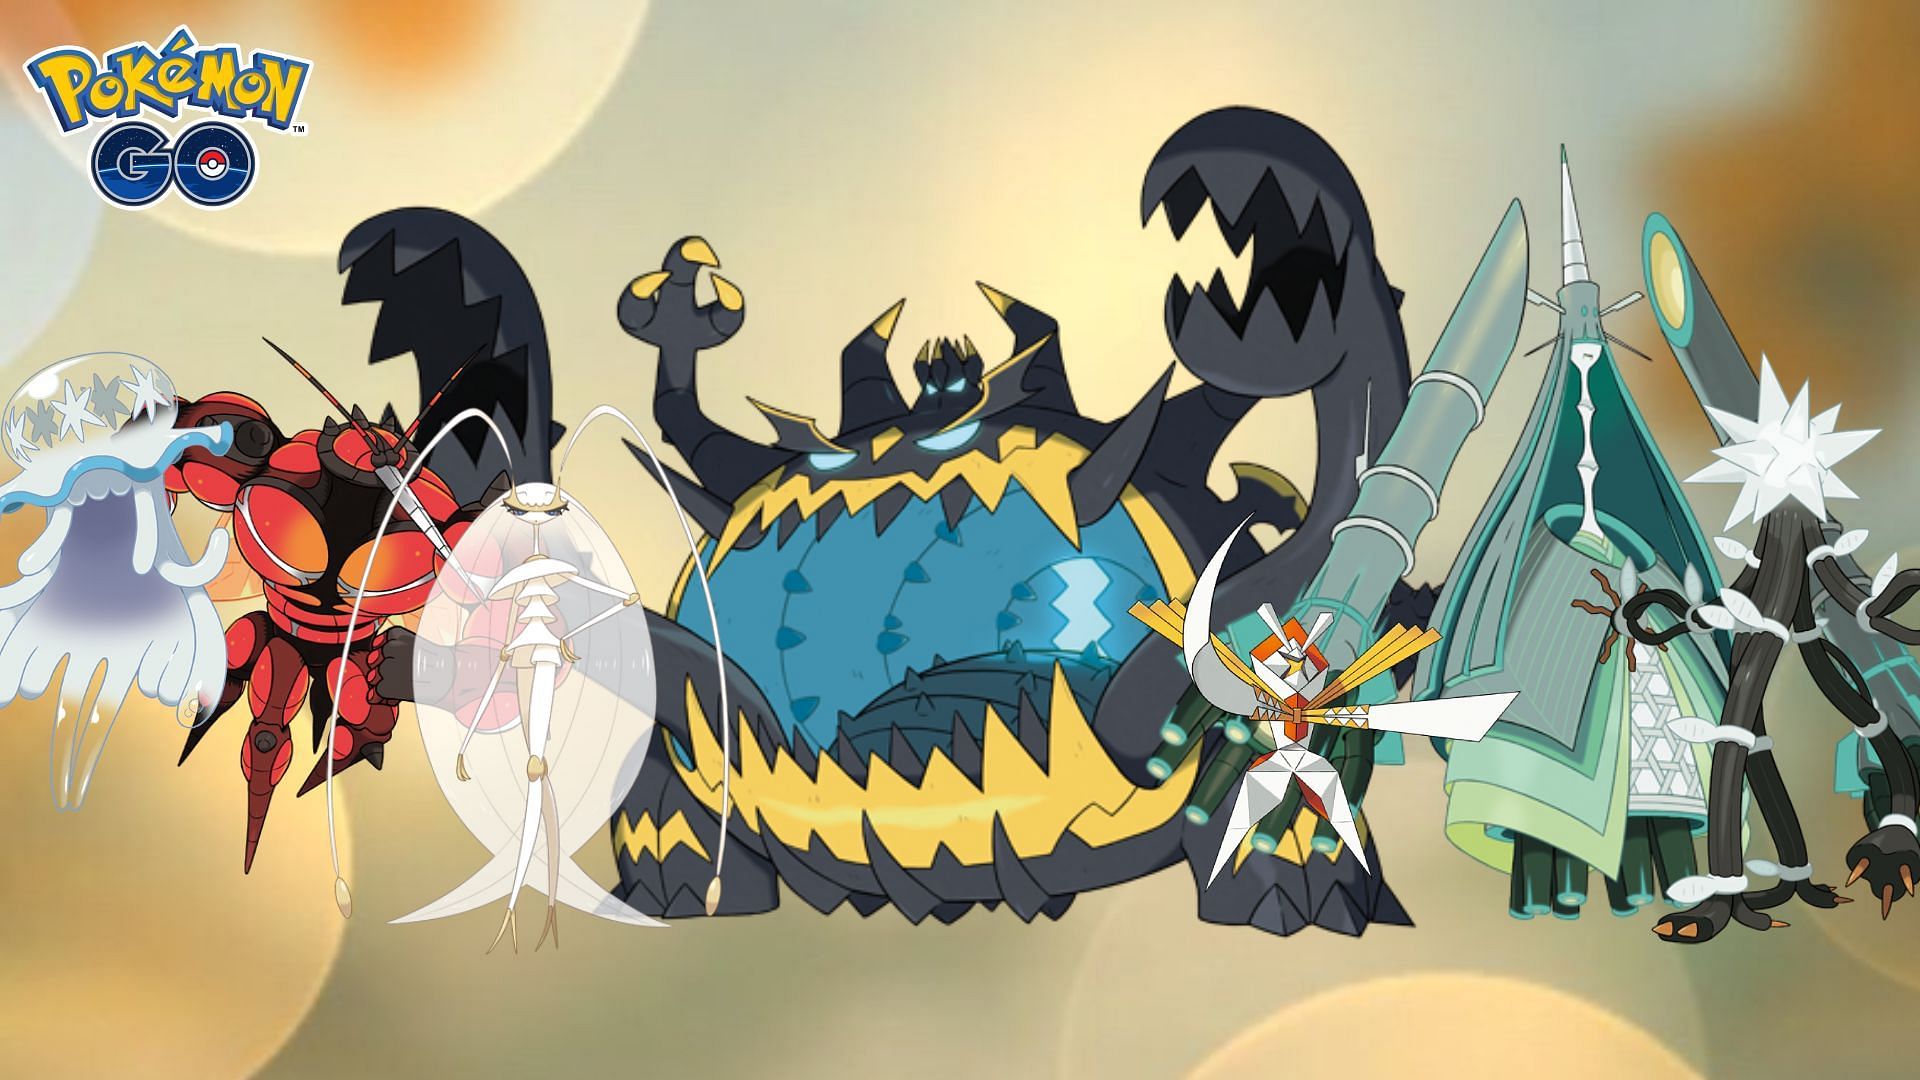 New Raid Attackers: Bug Out and Ultra Beasts (Electric and Bug types)